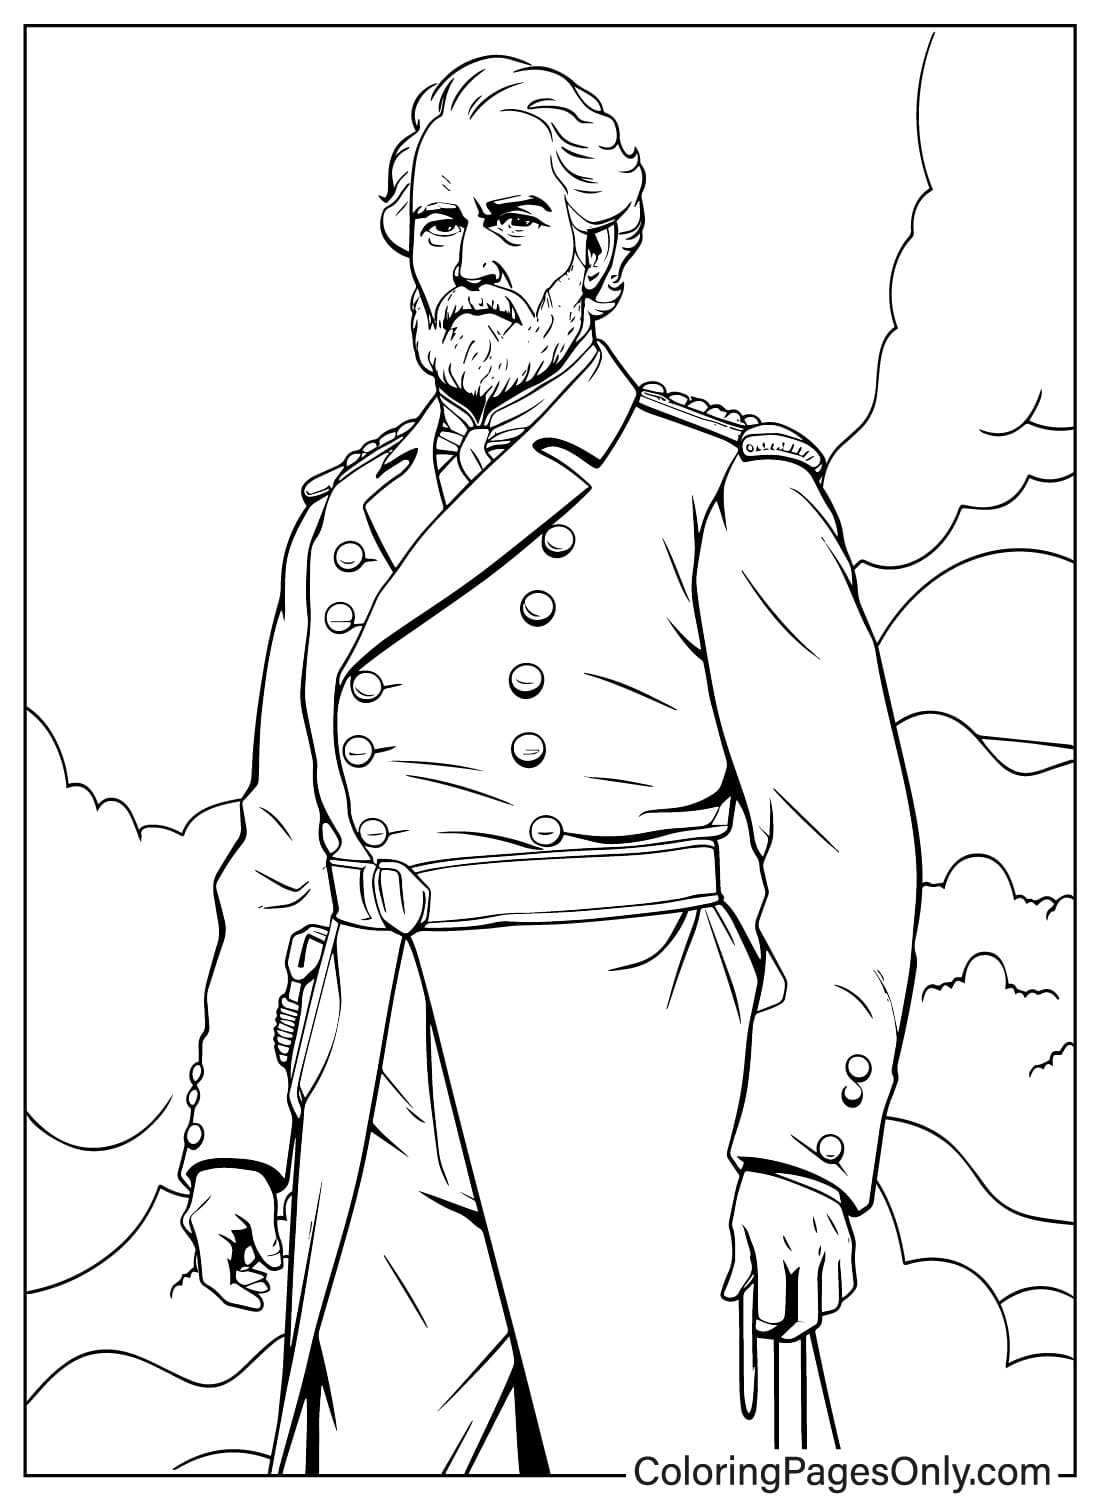 Printable Robert E. Lee Coloring Page from Robert E. Lee